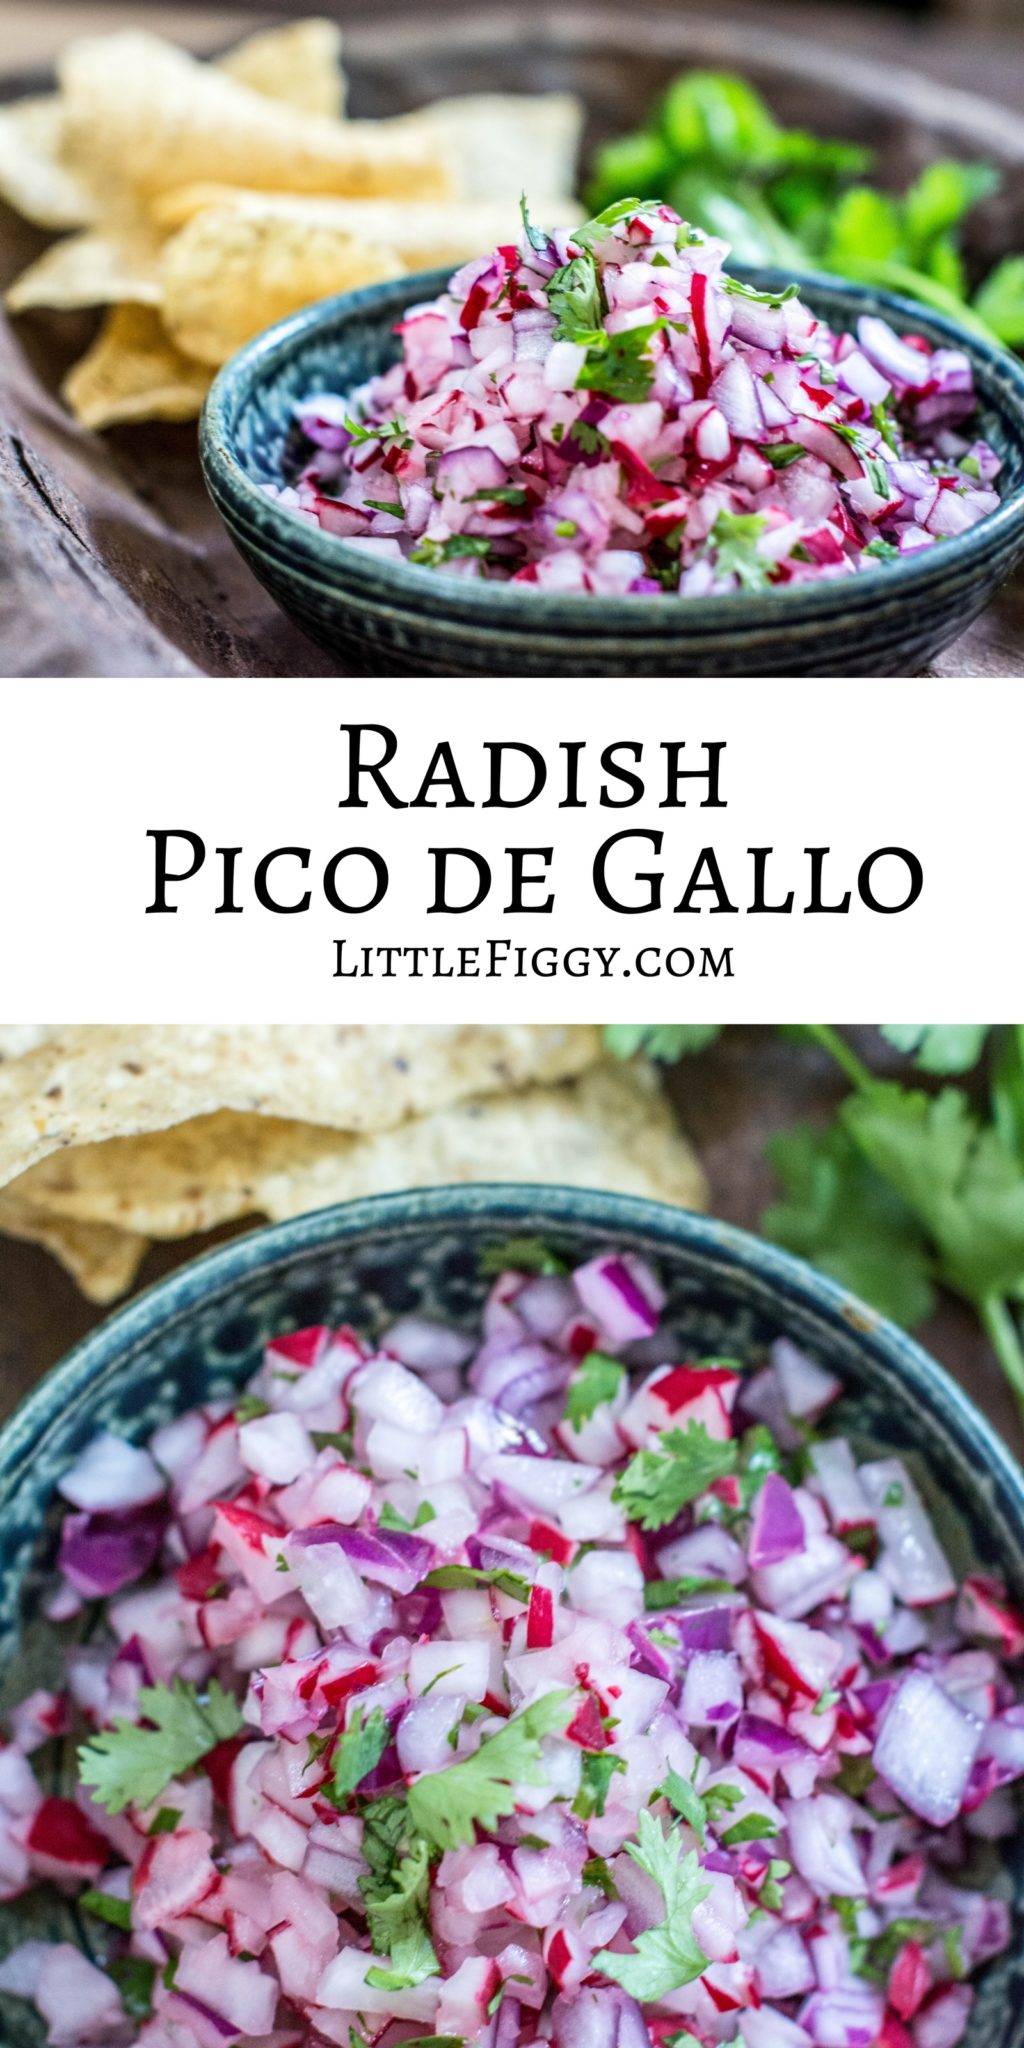 A super easy and tasty salsa, perfect for your next taco Tuesday, Nachos, or with a bag of Tortillas, try this Radish Pico de Gallo! Get the salsa recipe from Little Figgy Food